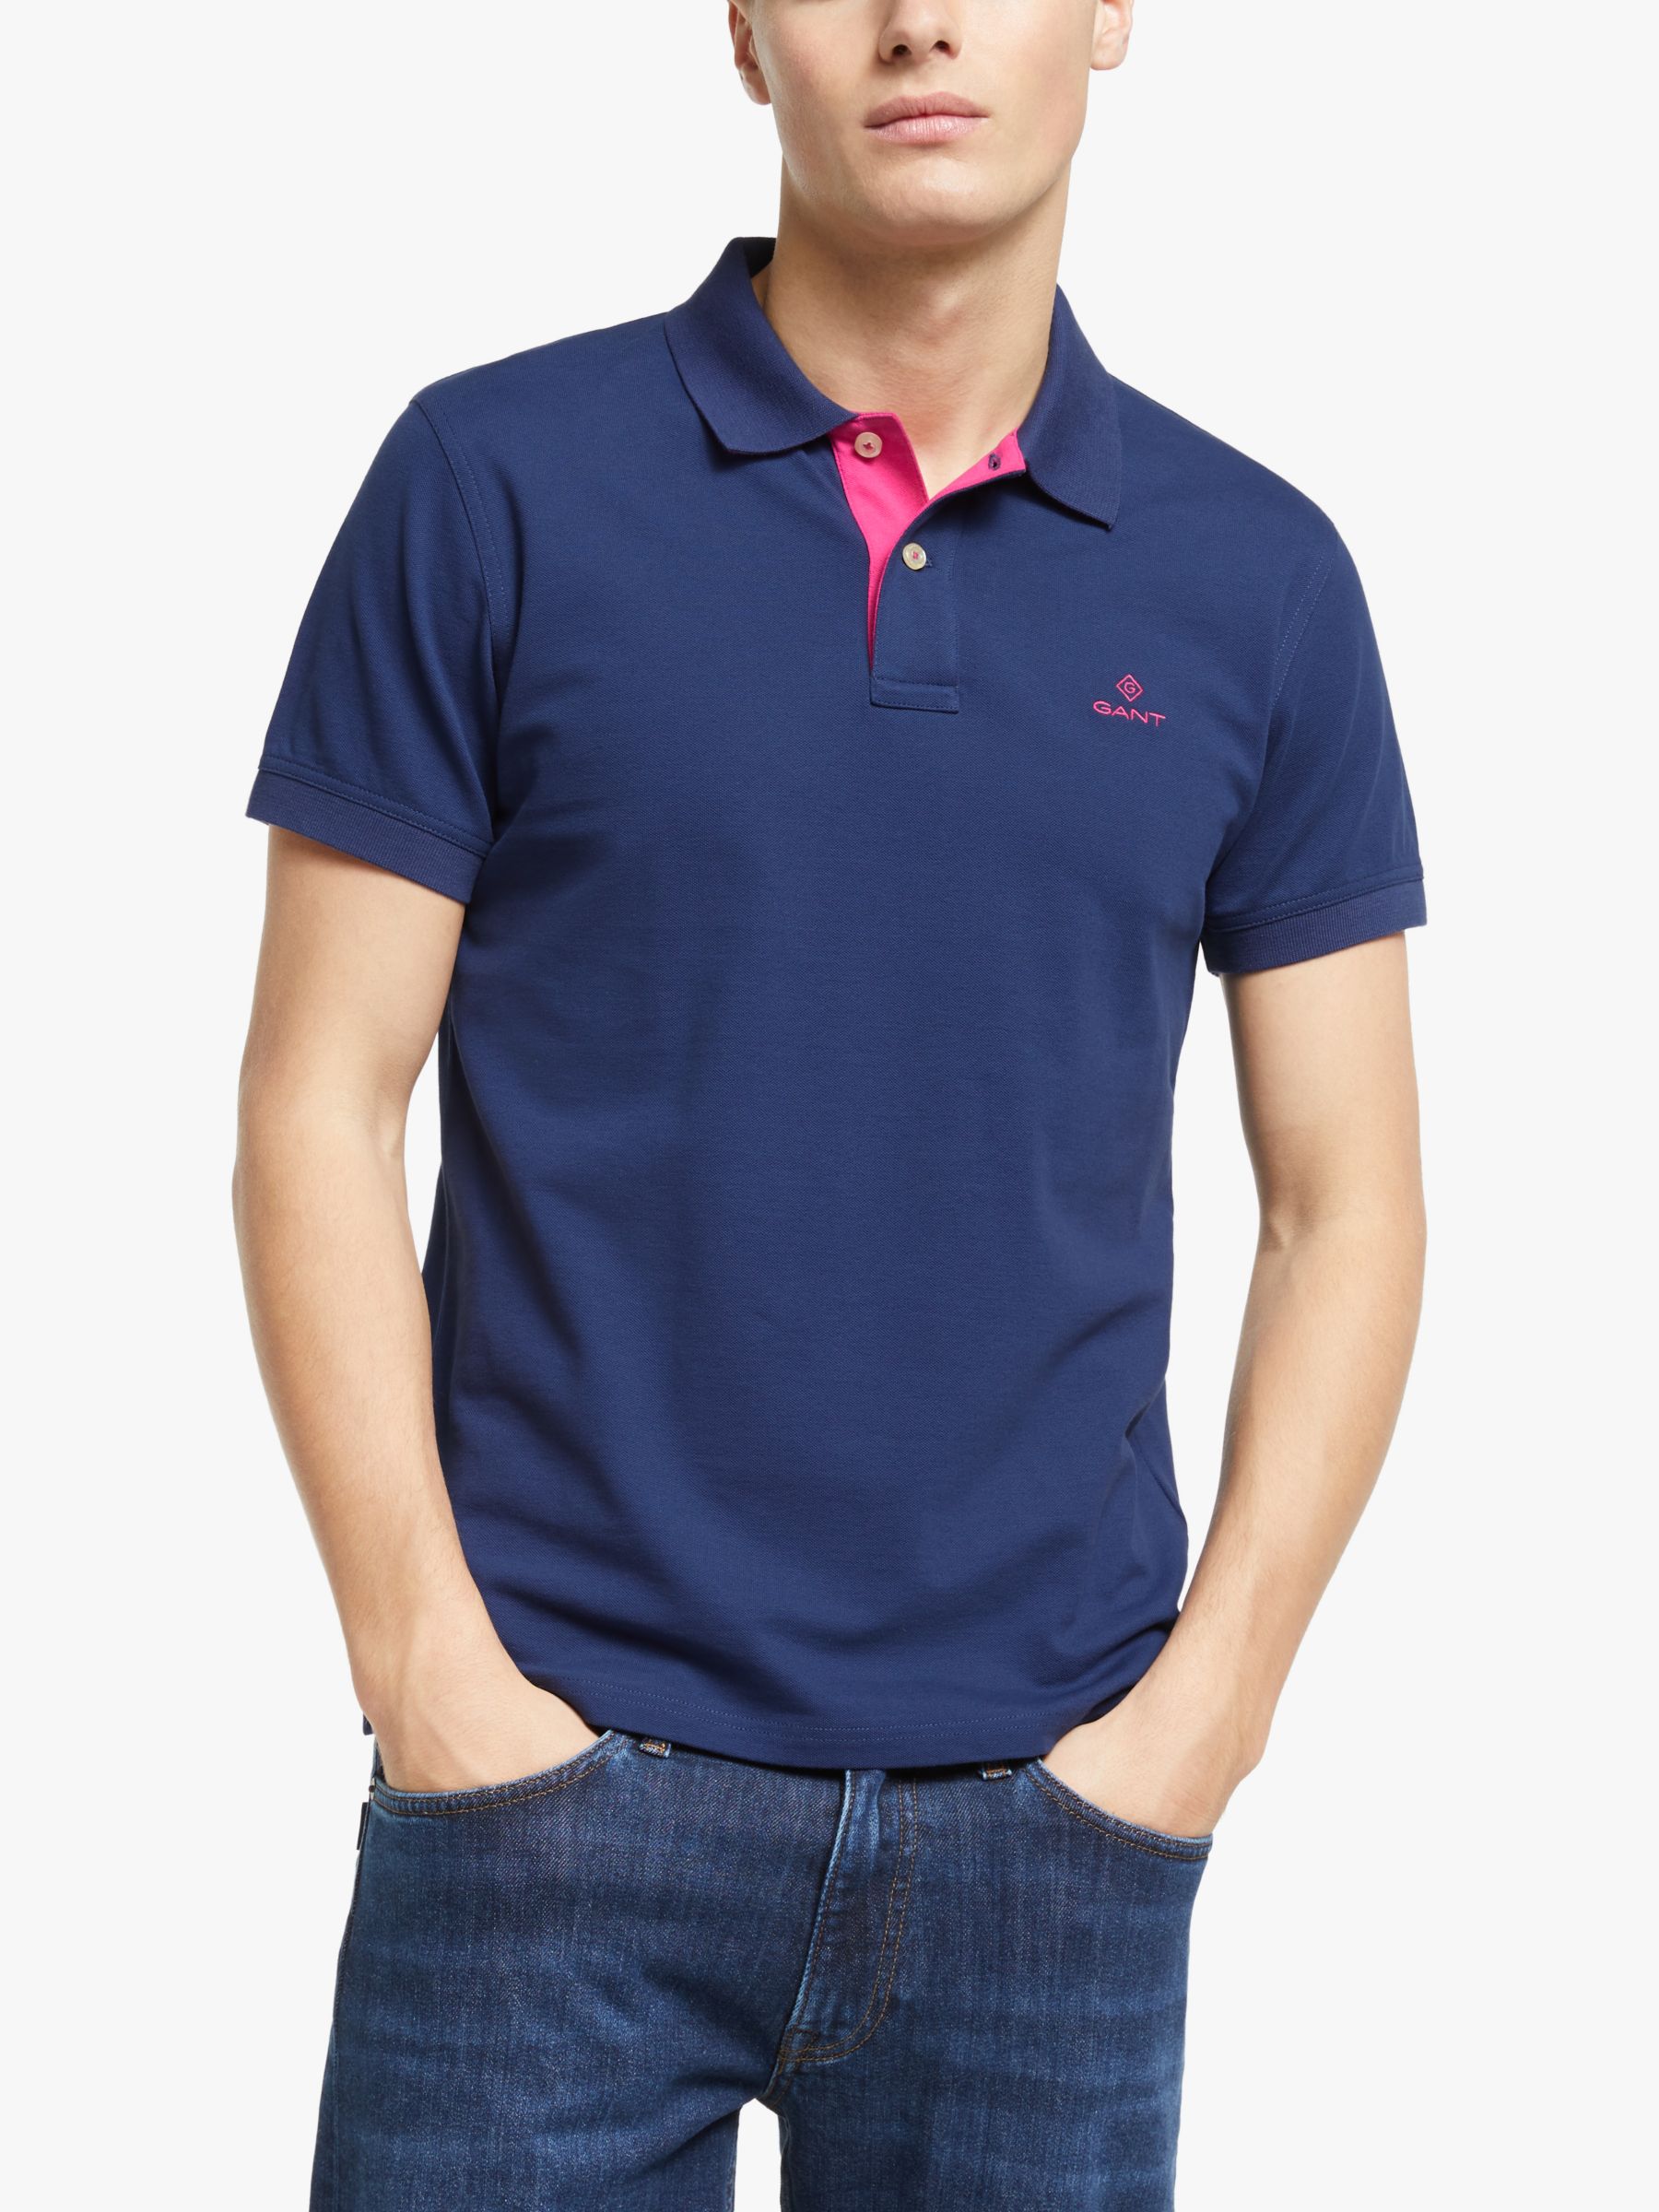 Men's GANT Polo & Rugby Shirts | Lewis & Partners